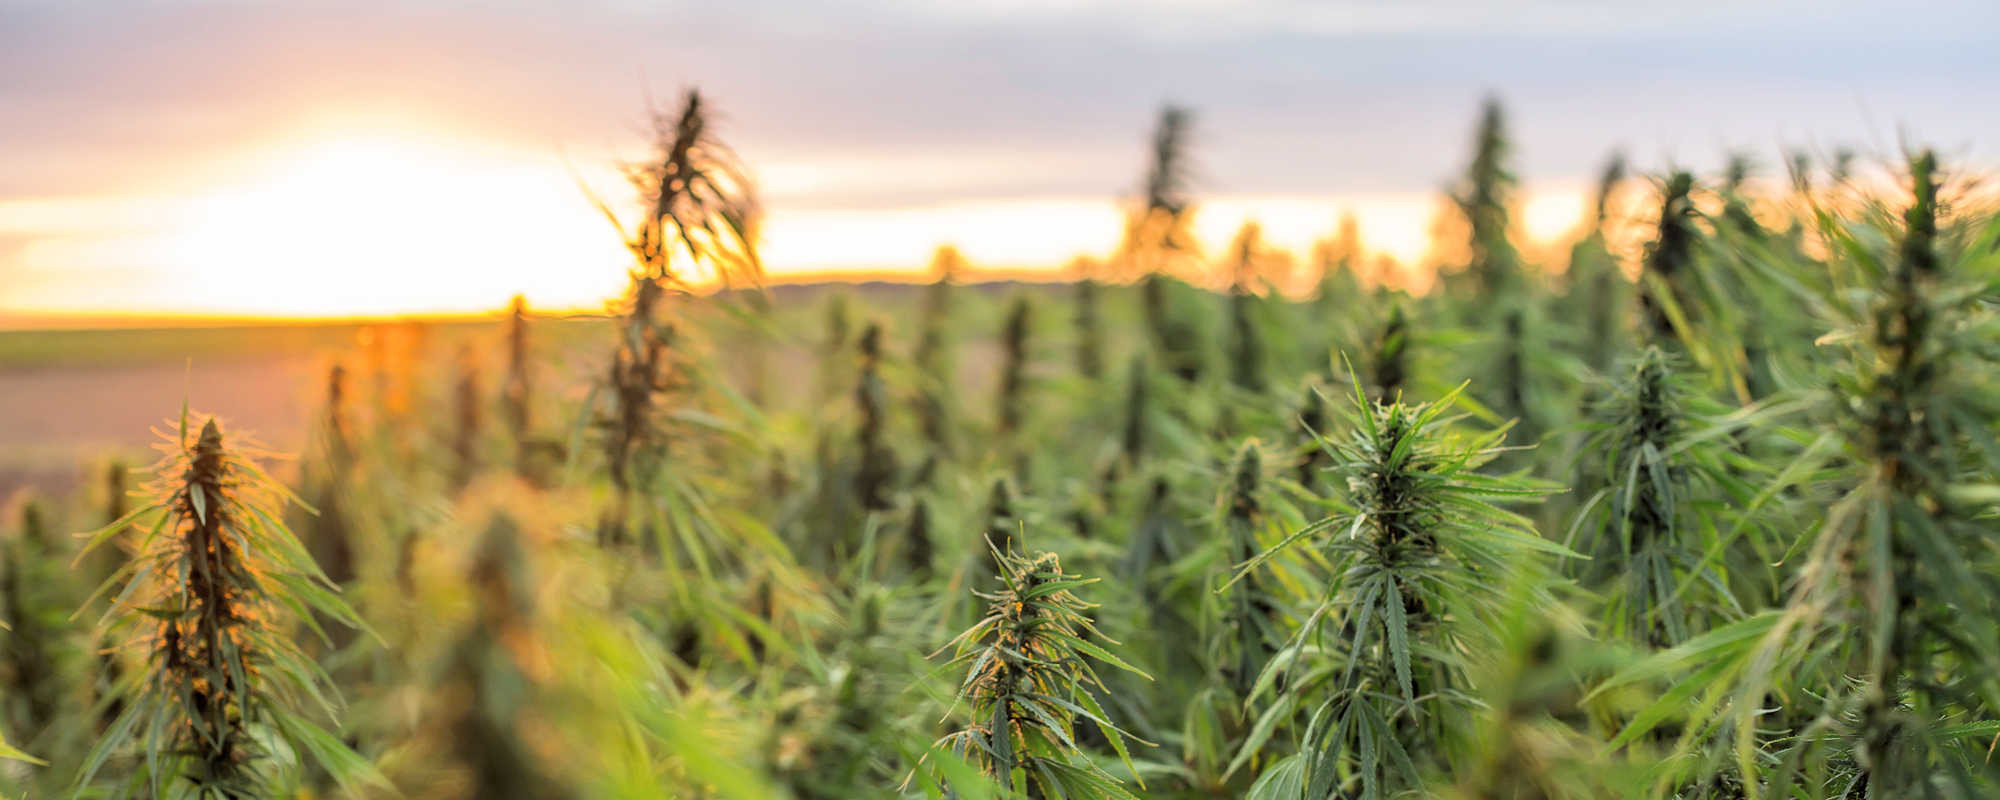 The Hemp Harvest in a Challenging Year